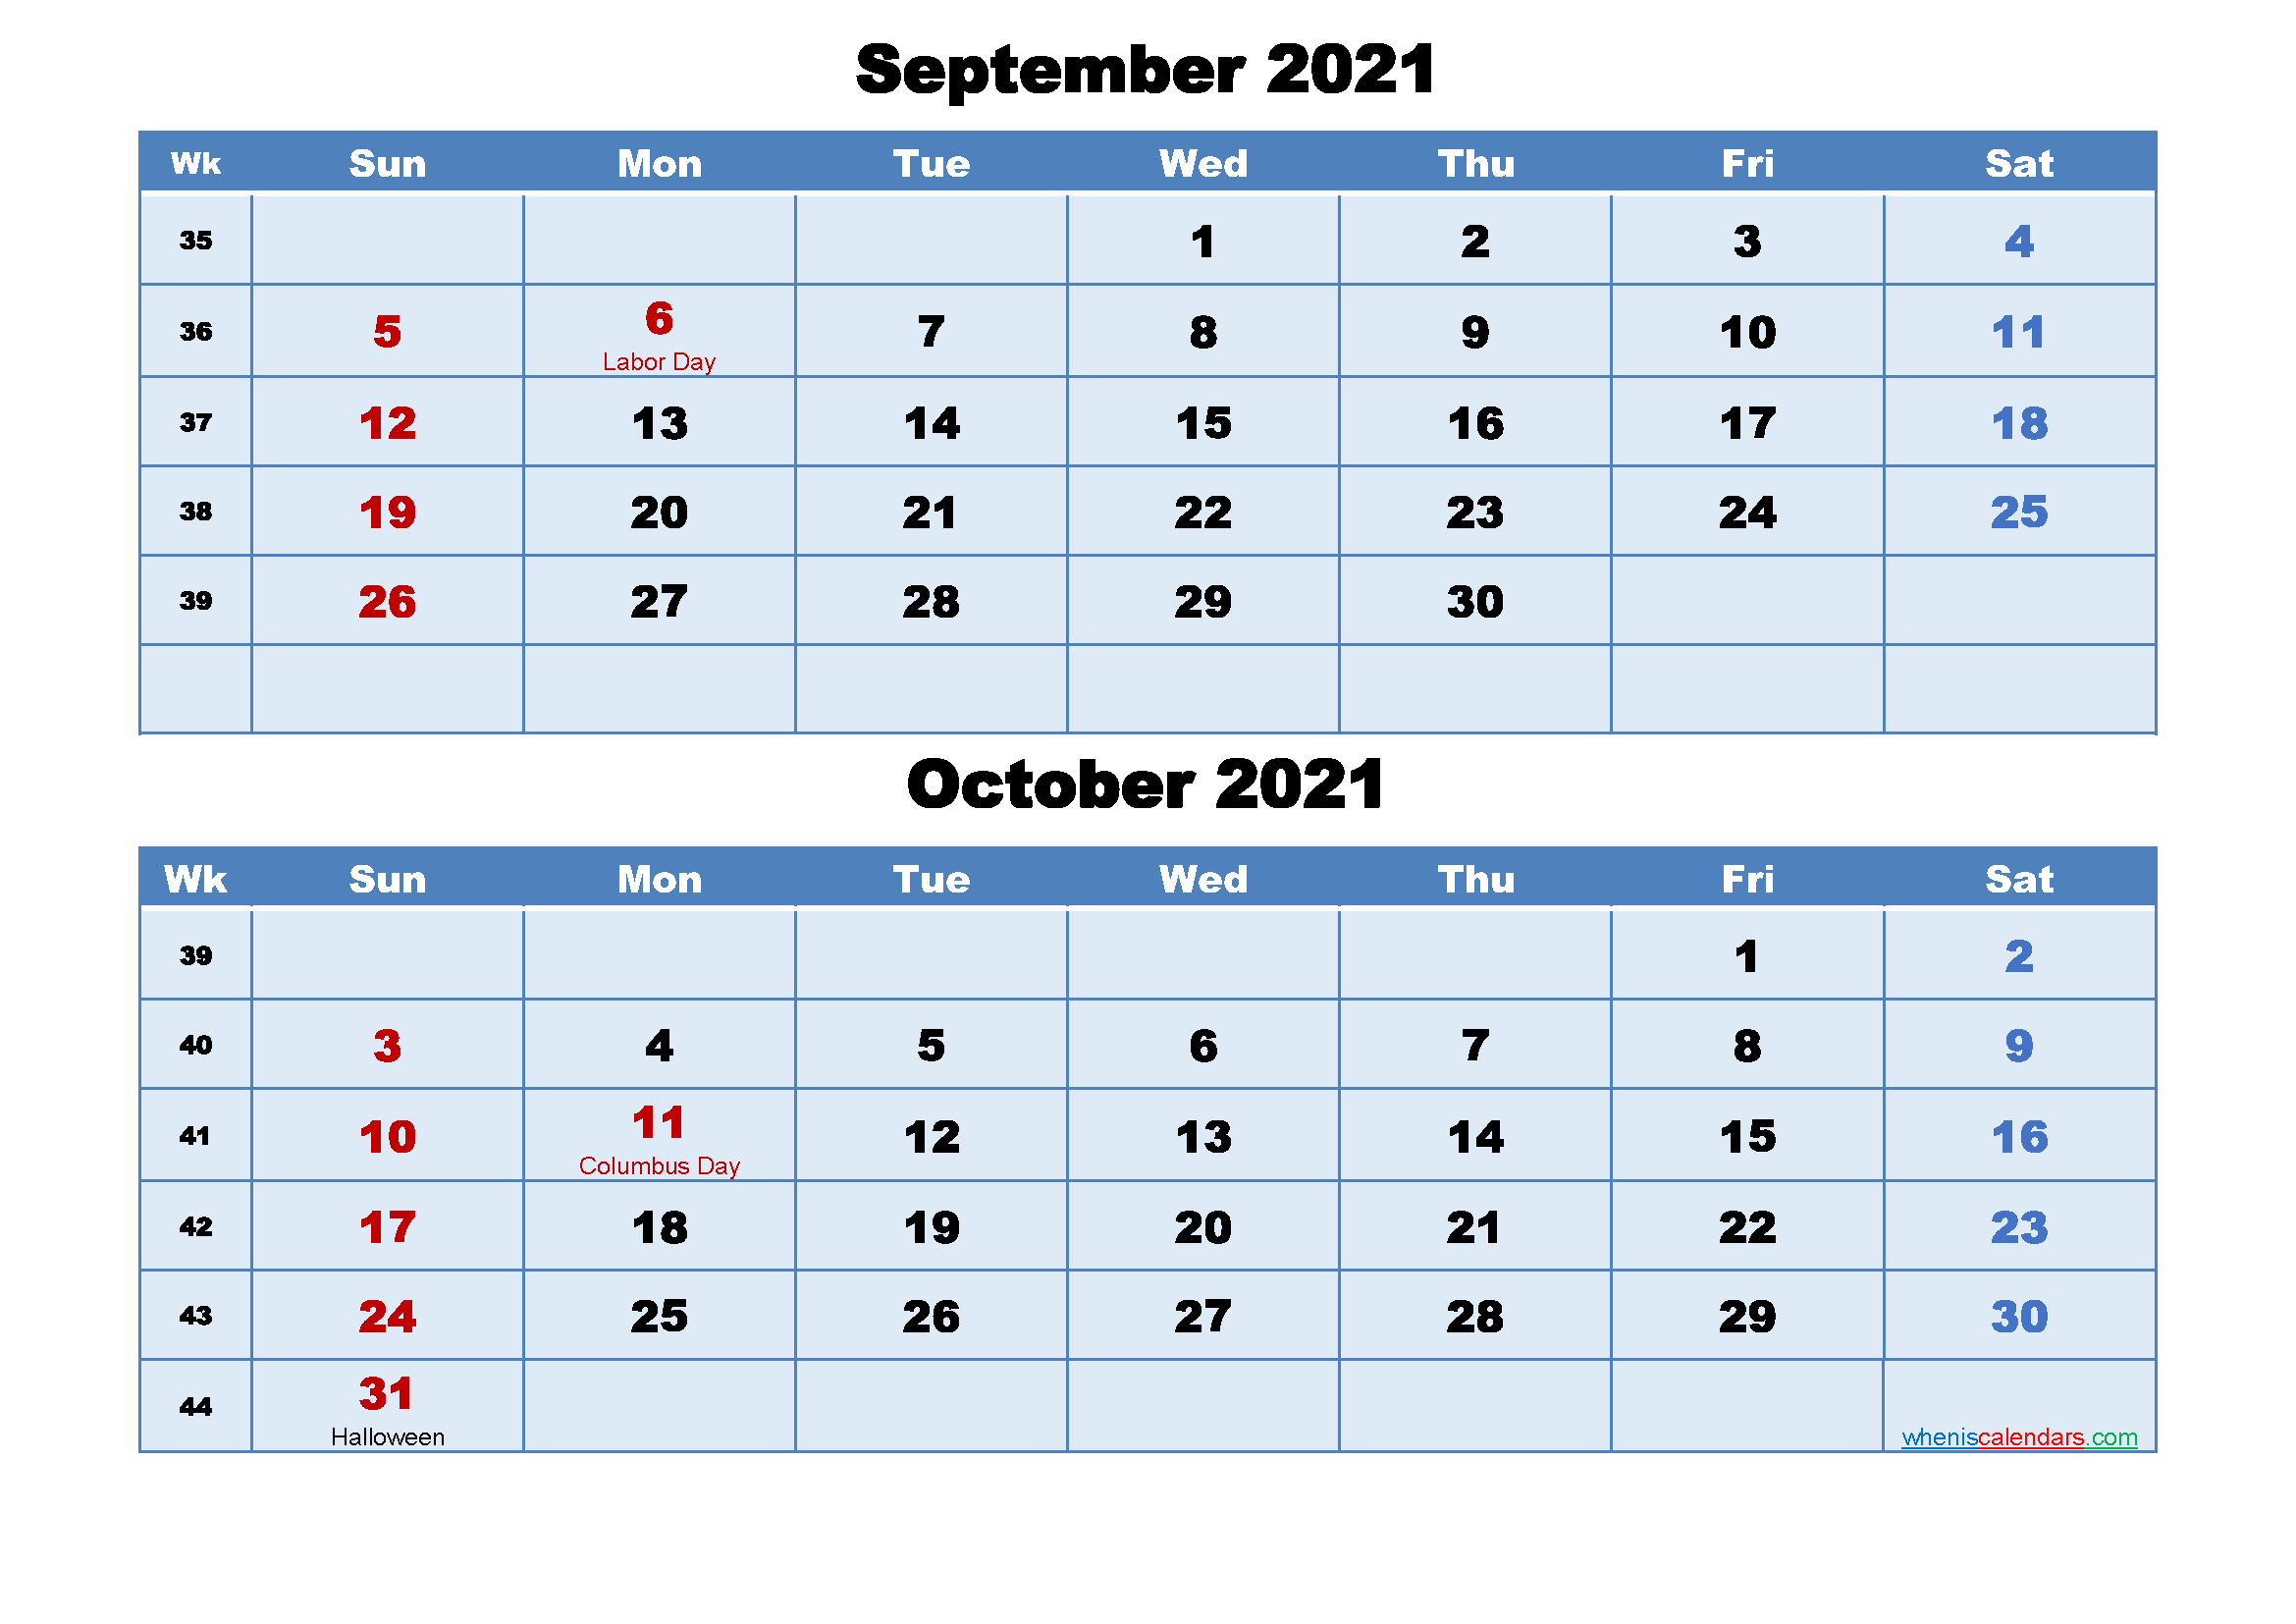 sept and oct 2021 calendar September And October 2021 Calendar With Holidays Free Printable 2020 Monthly Calendar With Holidays sept and oct 2021 calendar